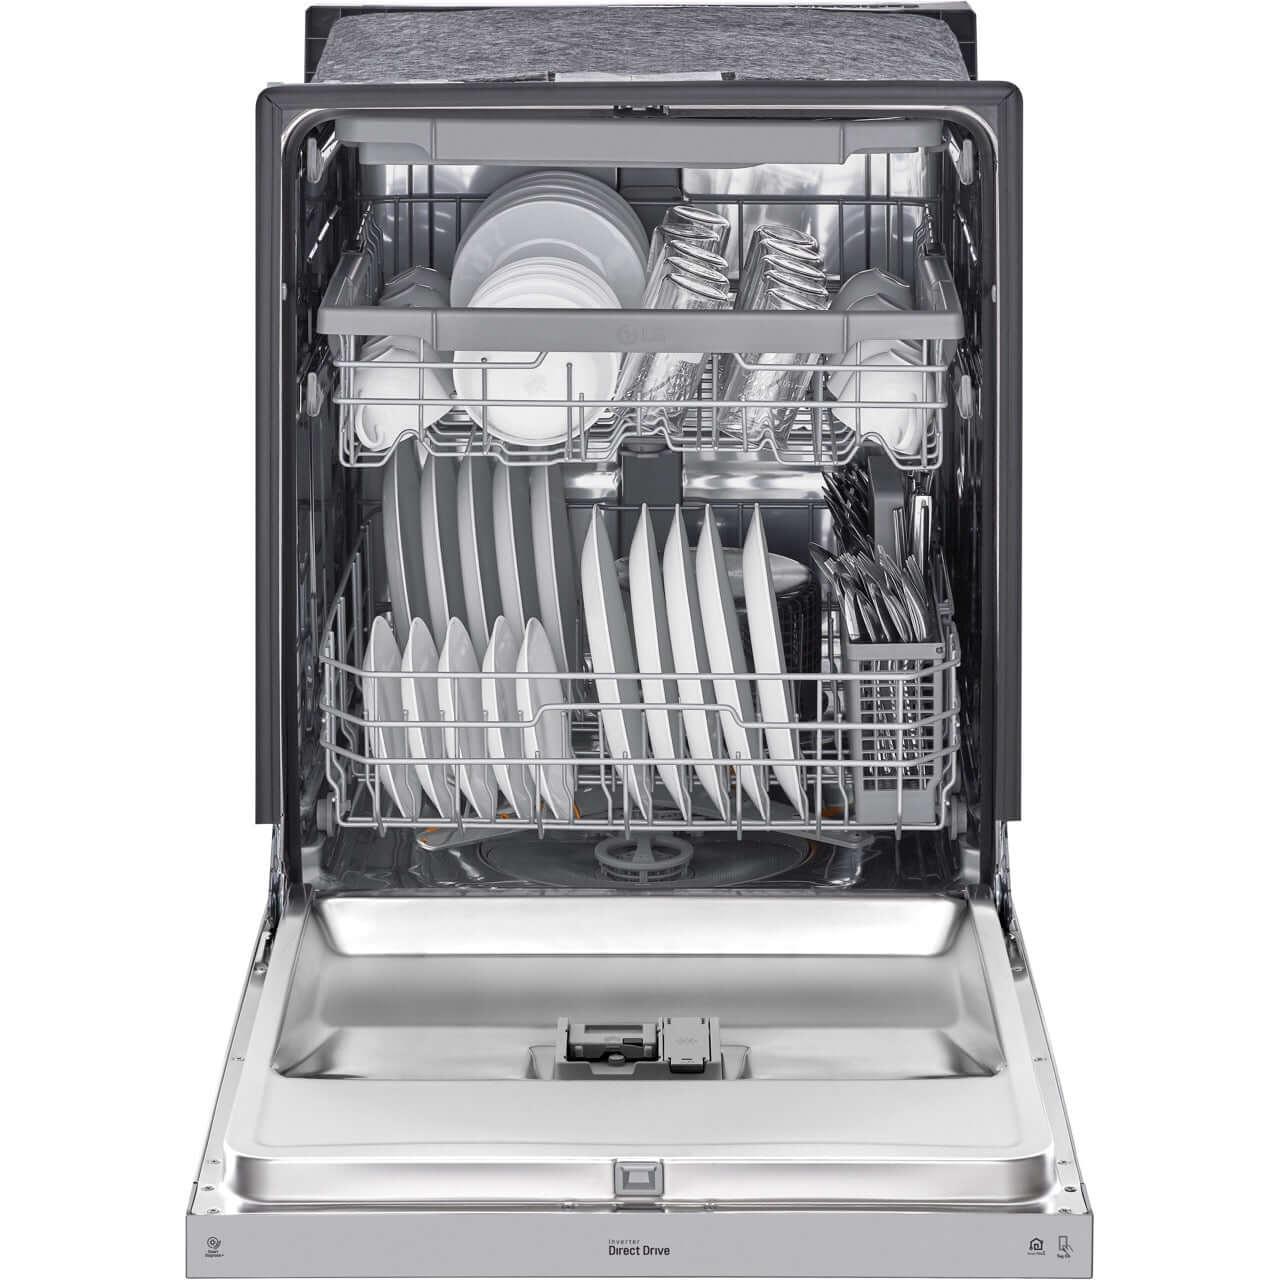 LG 24-Inch Front Control Dishwasher with QuadWash in Stainless Steel (LDFN4542S)